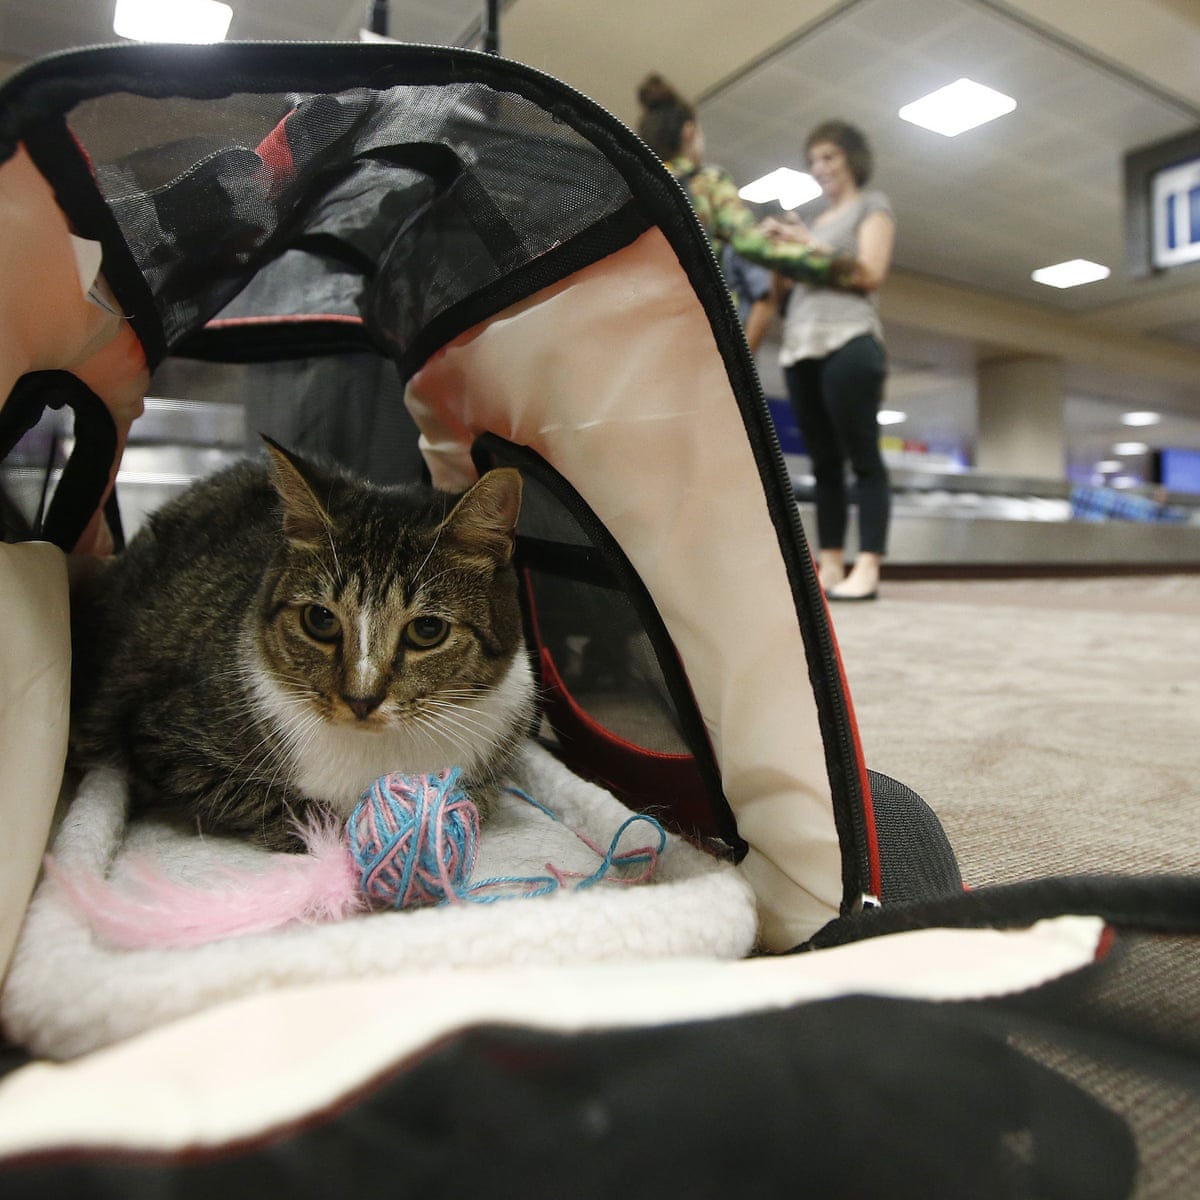 No more free rides: US seeks to limit emotional support animals on planes |  Airline industry | The Guardian